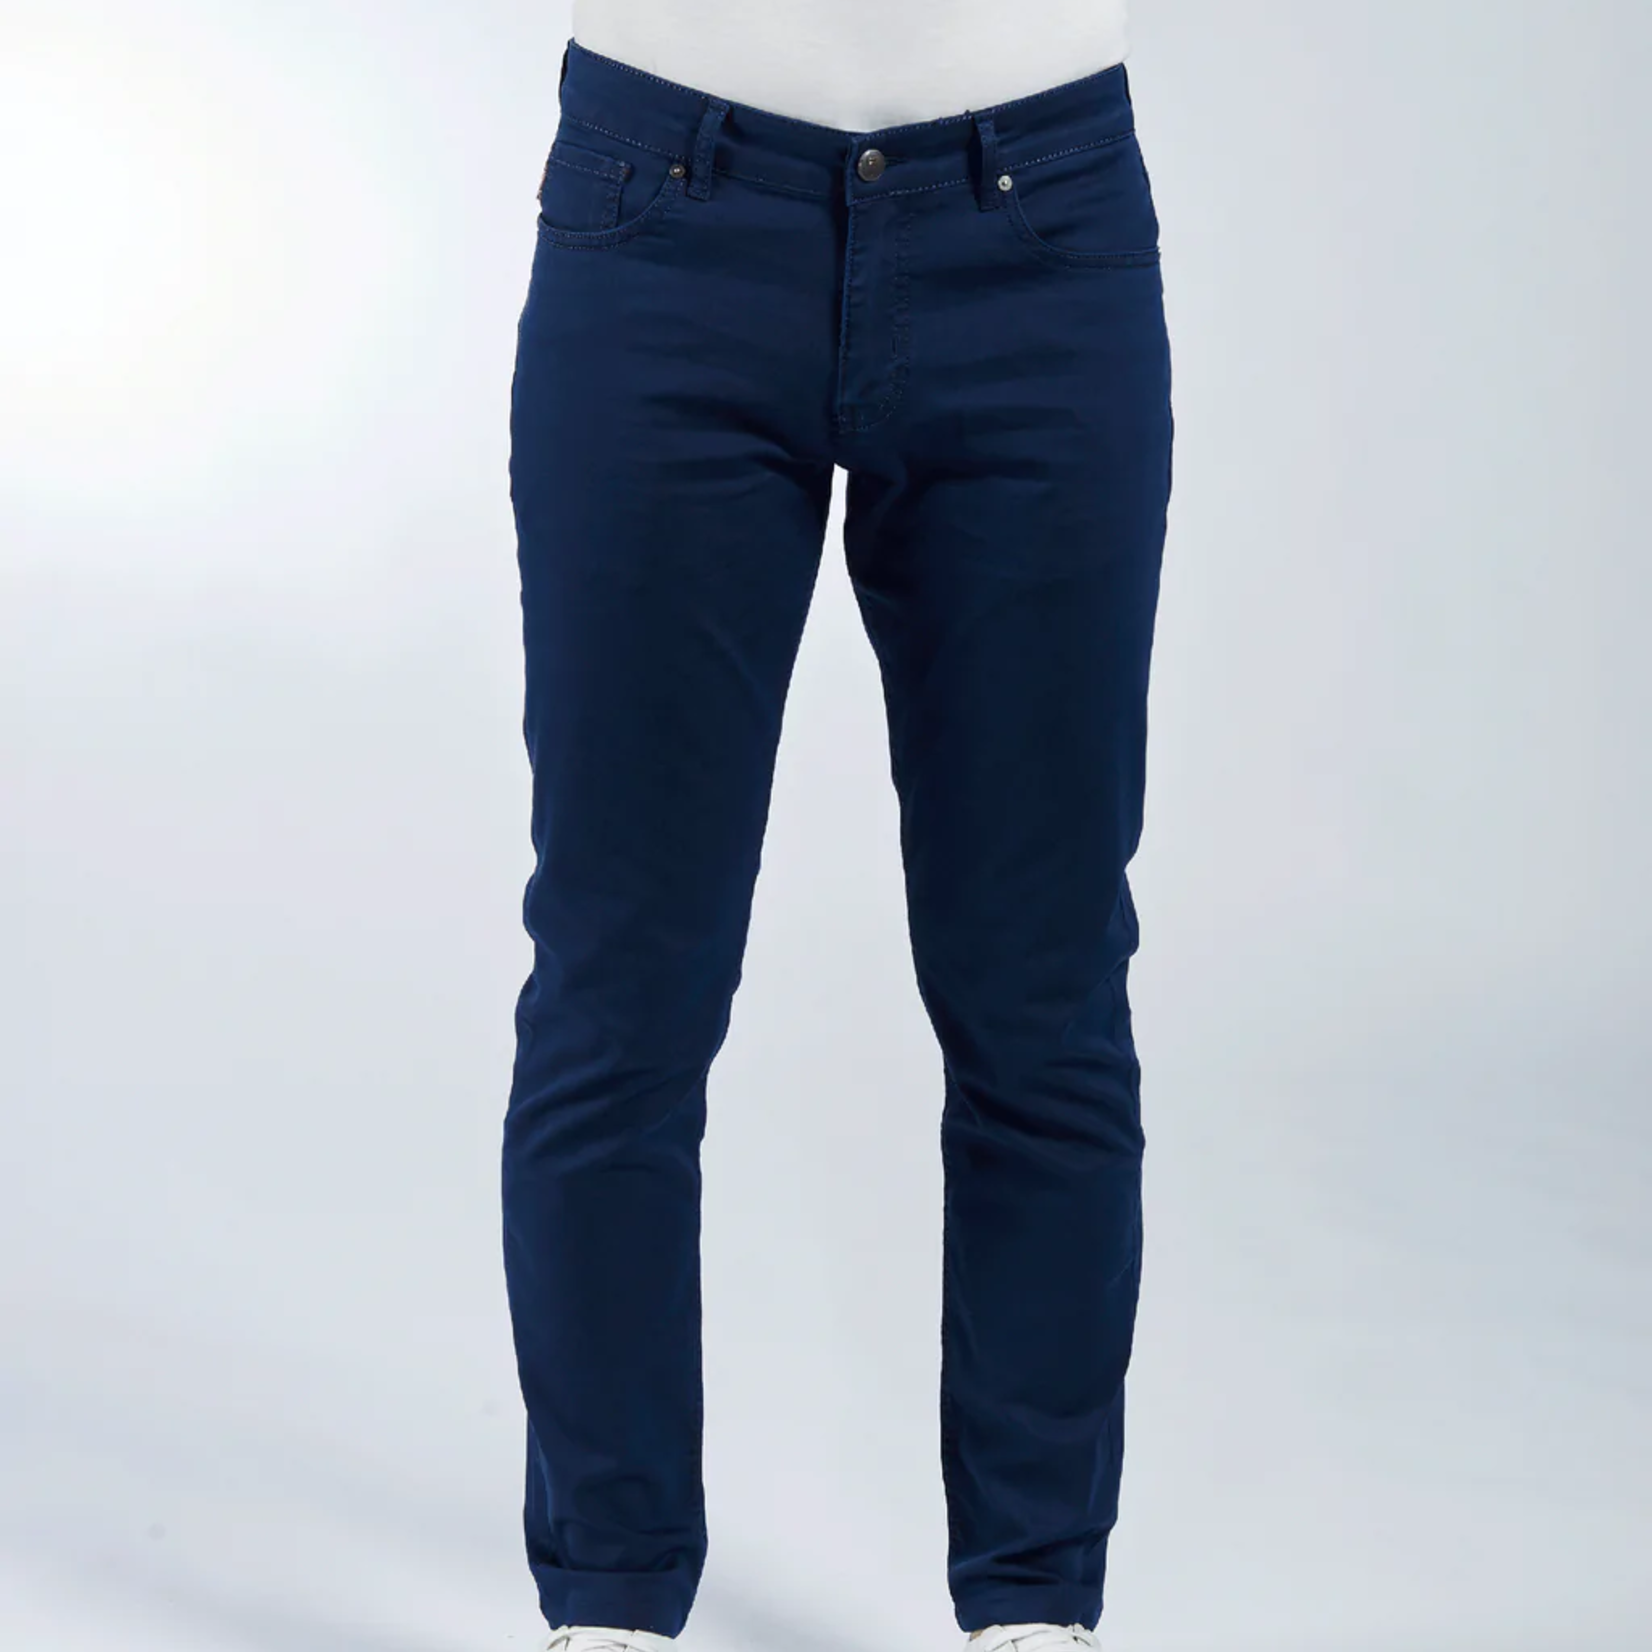 Copy of 7 Downie St - Zetterburg Pant (Navy Chel) - Ford and McIntyre ...